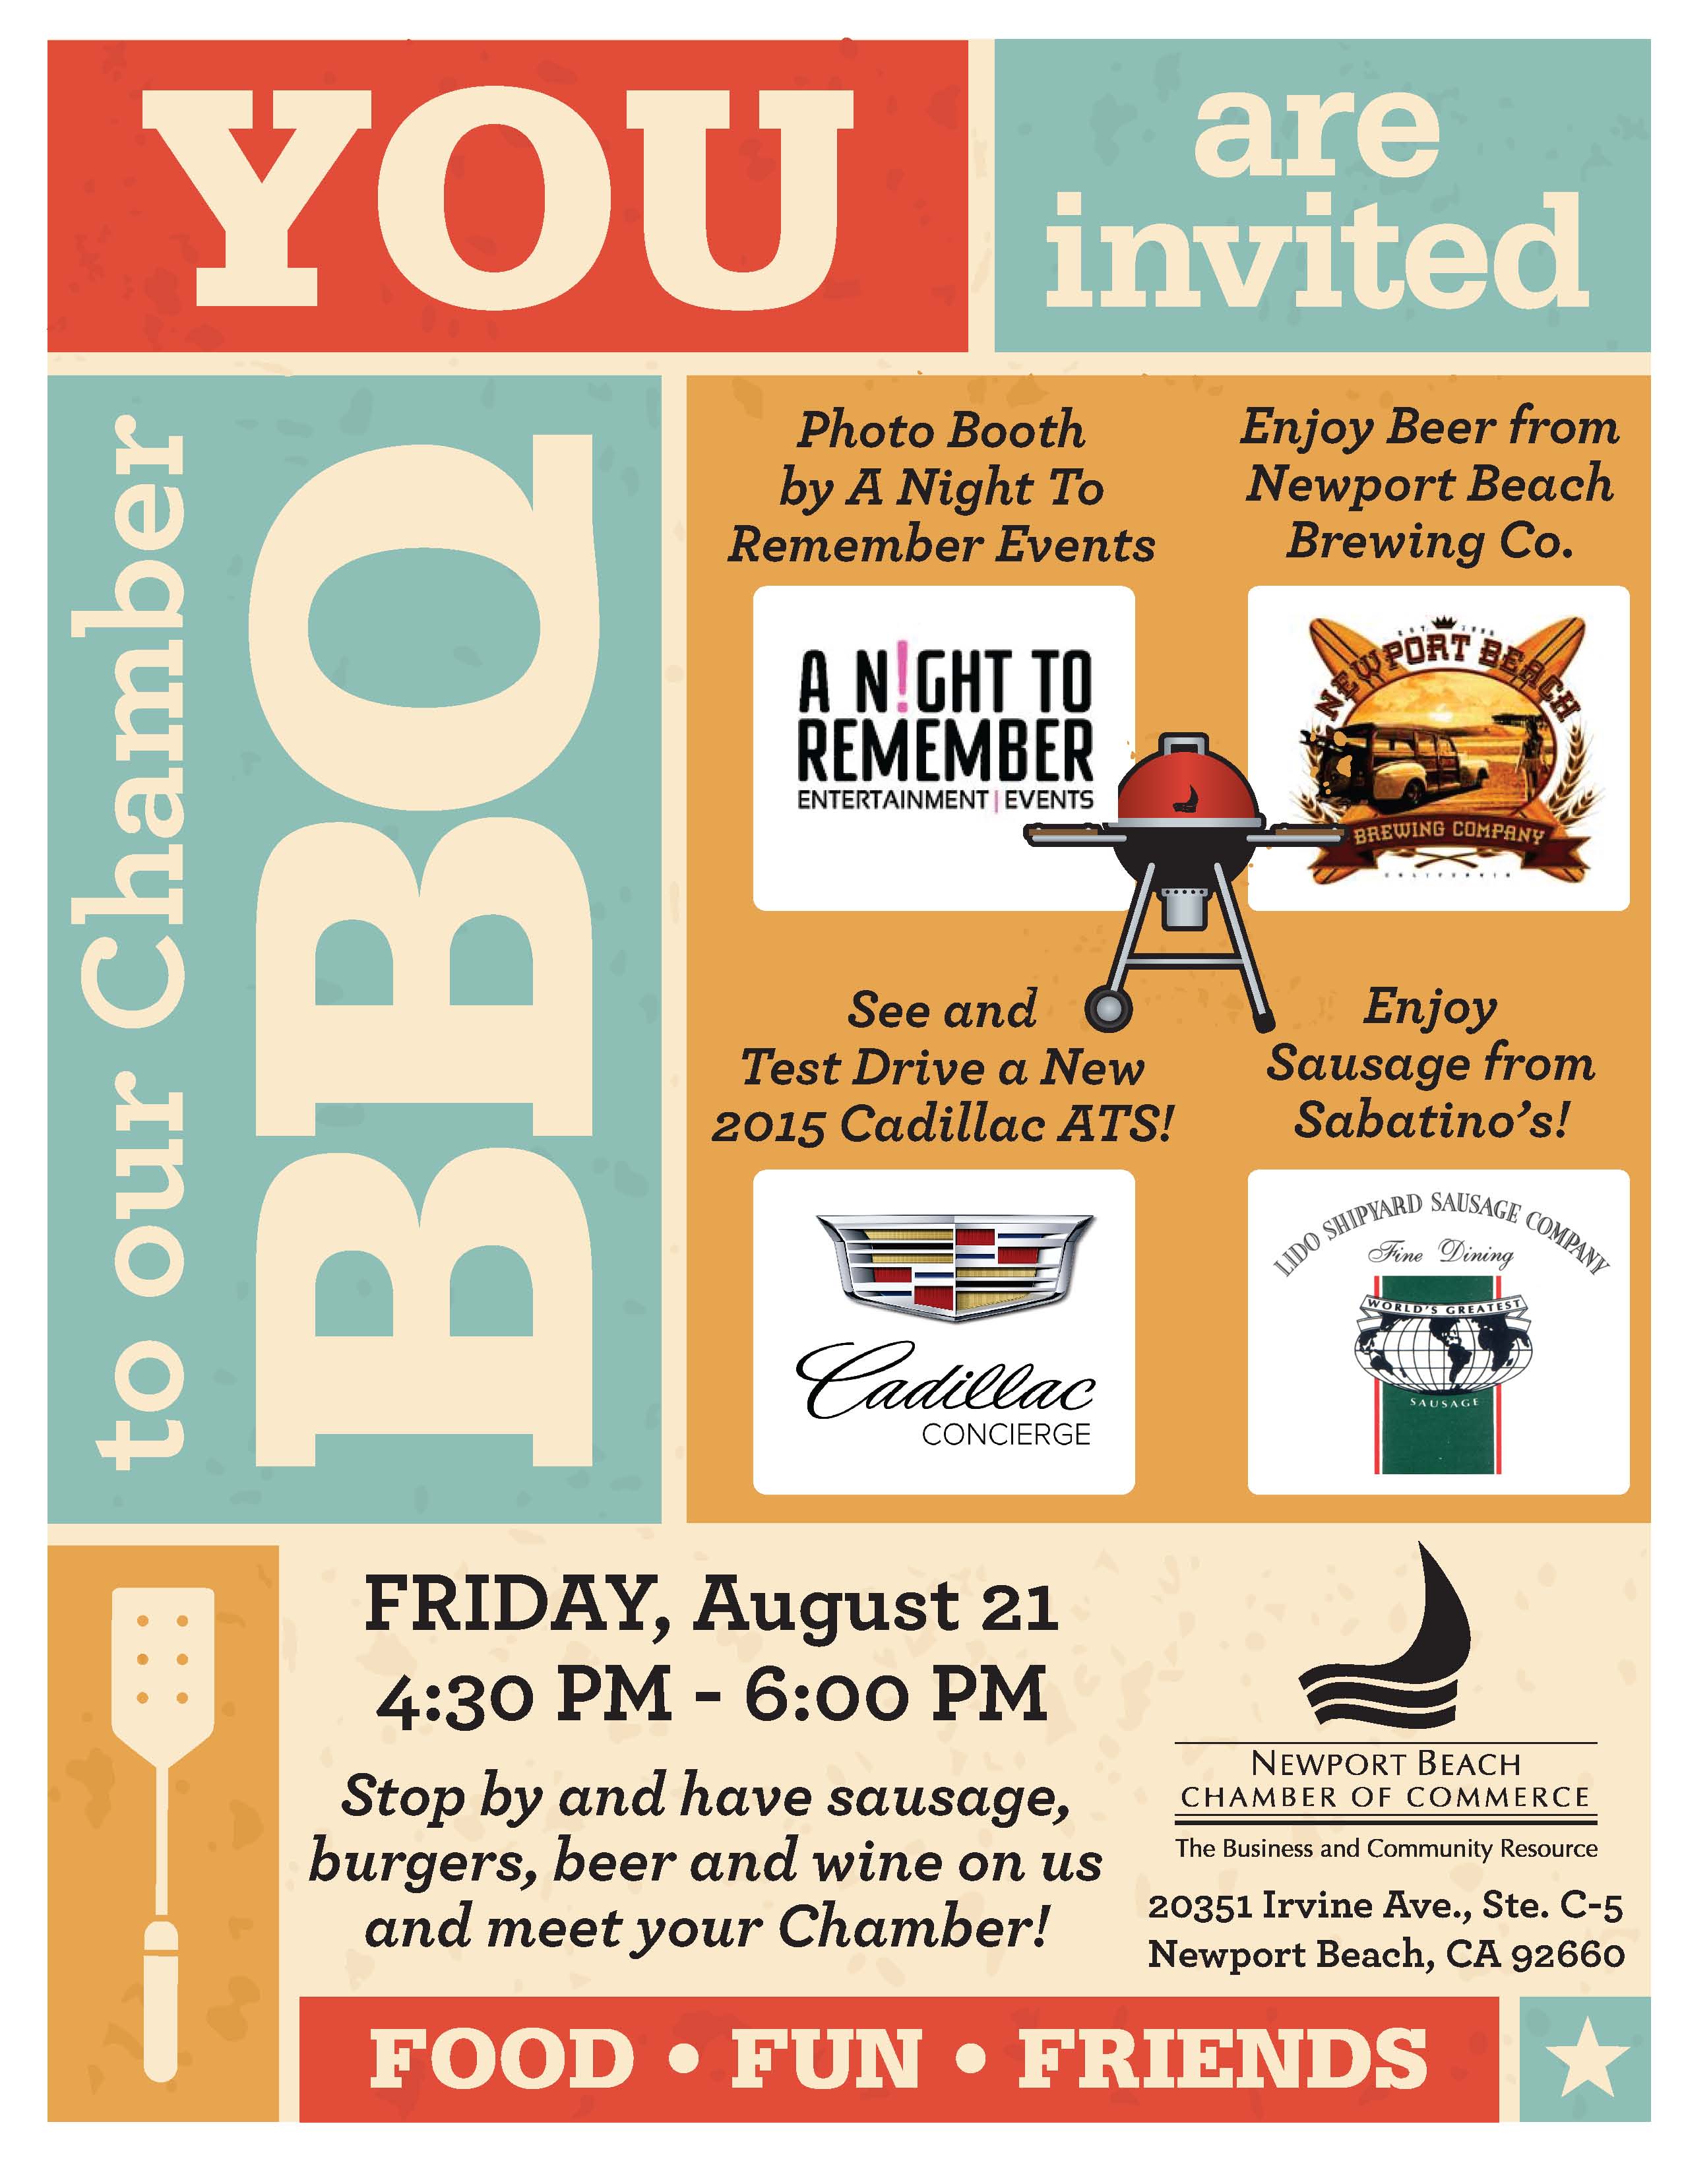 Meet Your Chamber BBQ...Come join the fun!